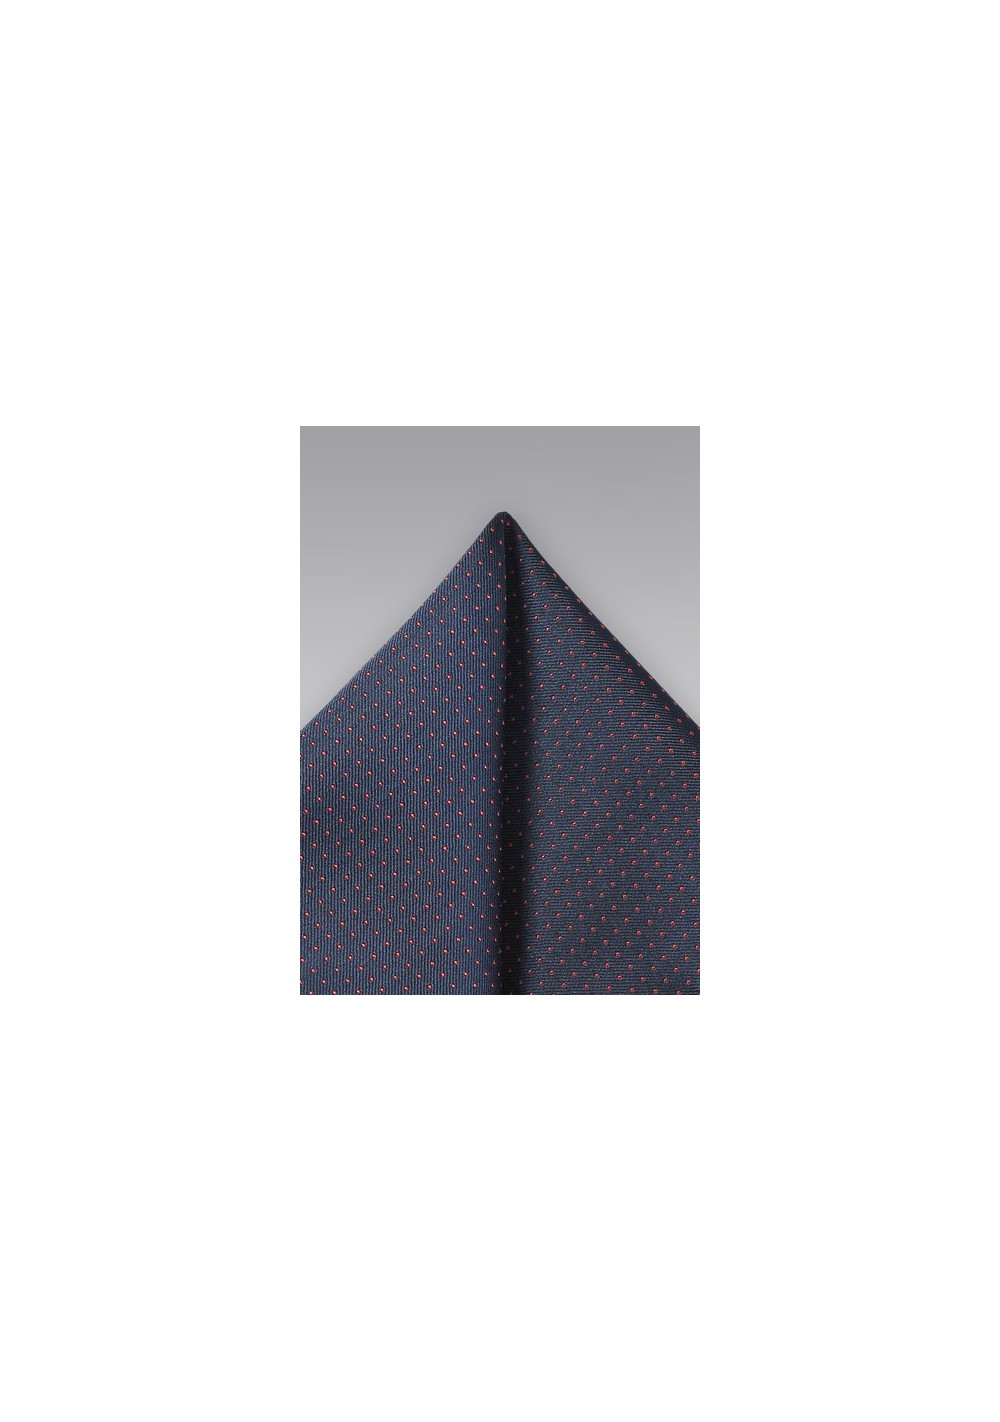 Navy and Coral Pocket Square